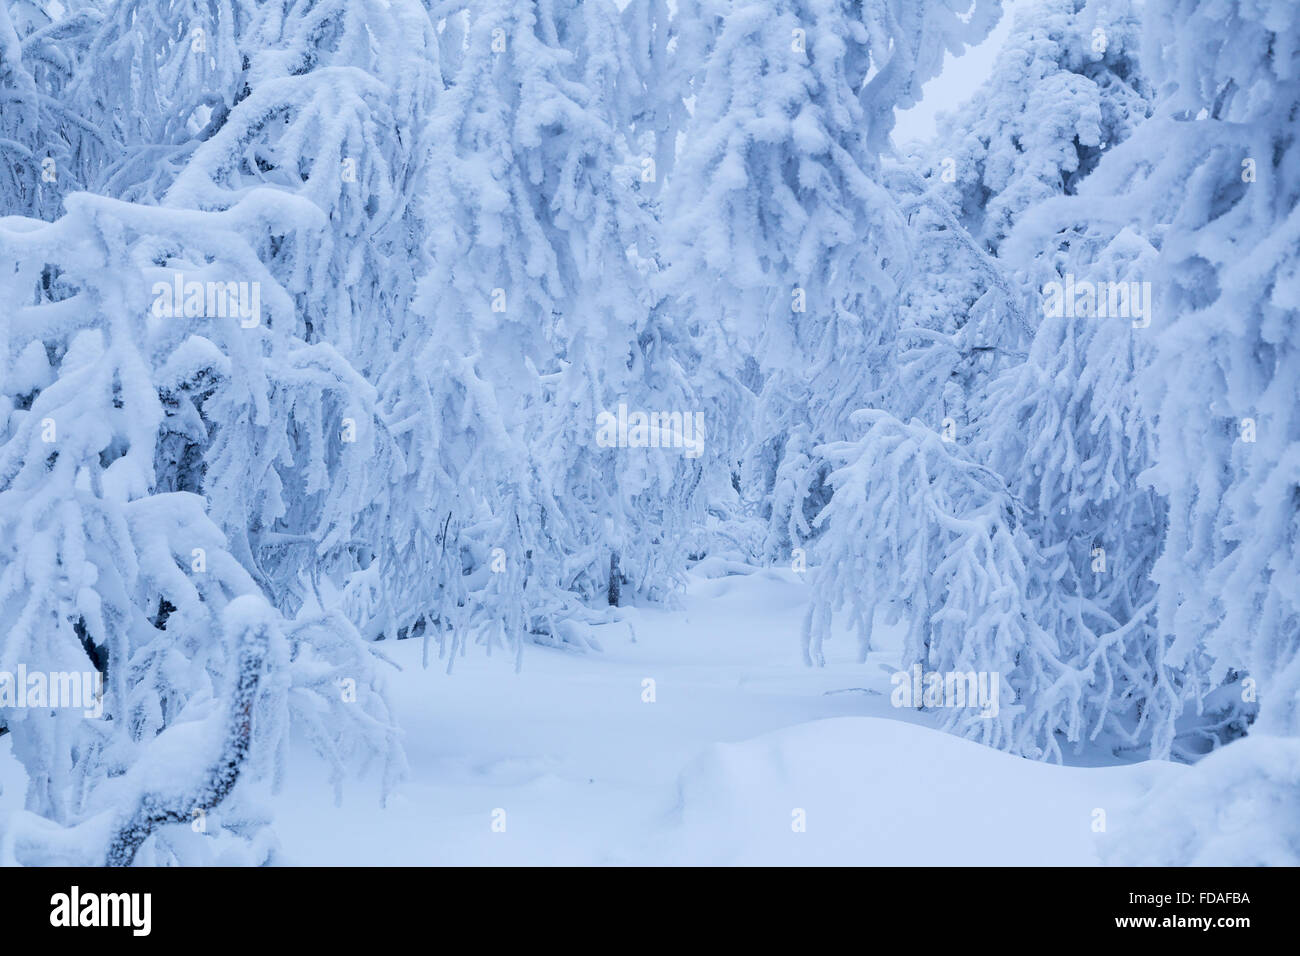 Snowy winter forest Stock Photo